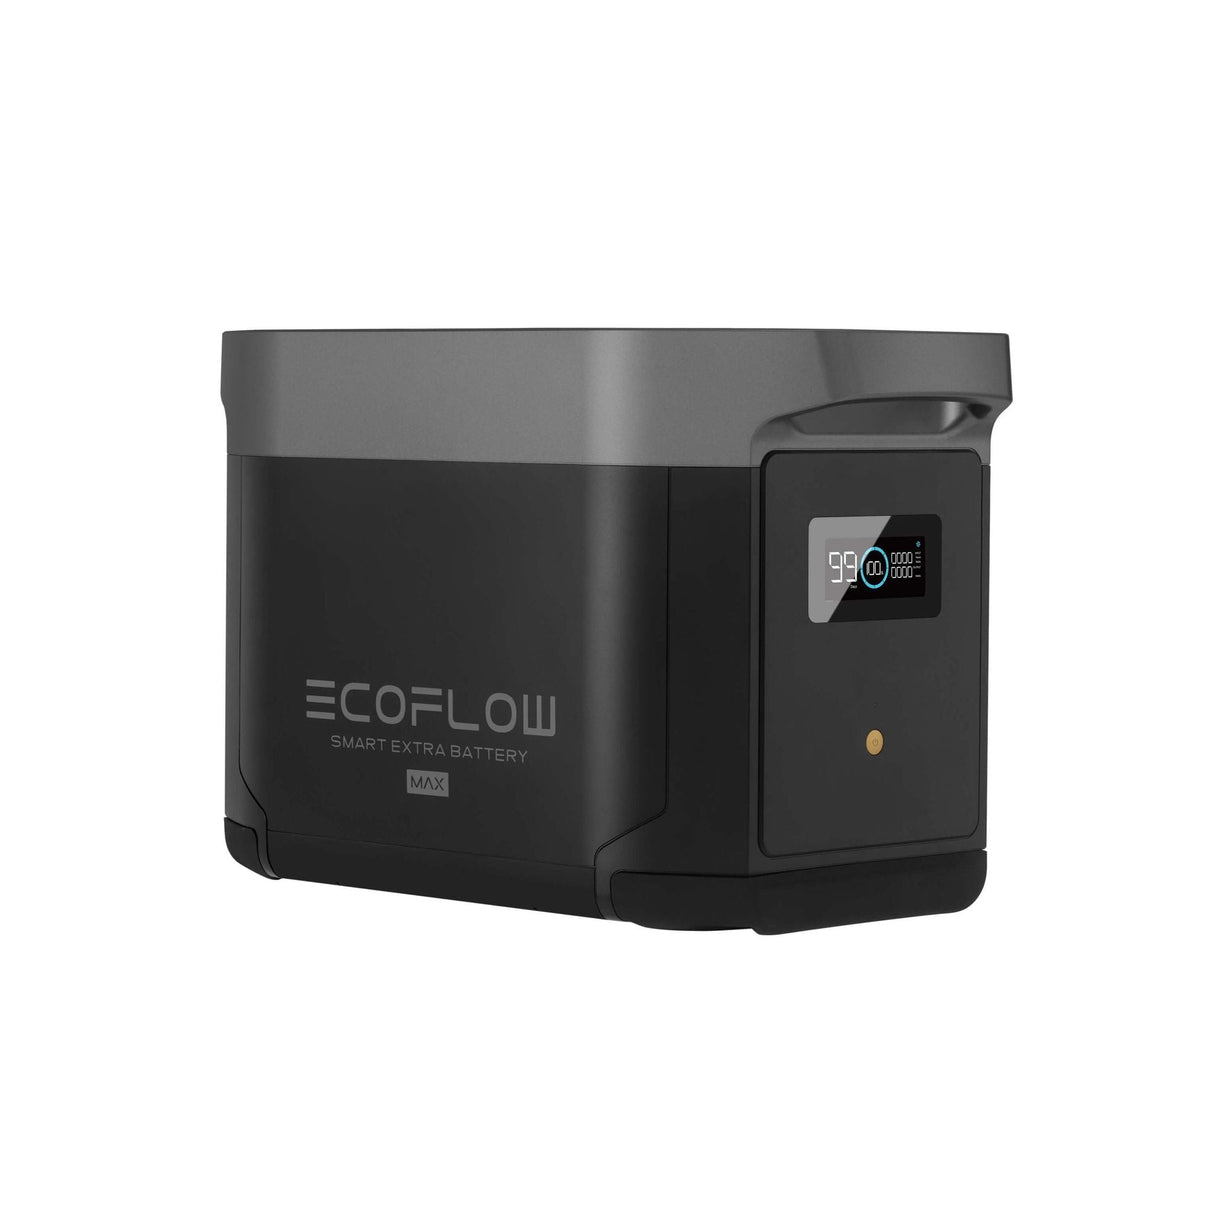 EcoFlow DELTA Max Smart Extra Battery - 2016Wh - 50031003 - EF-DELTA2000EB-US - Avanquil